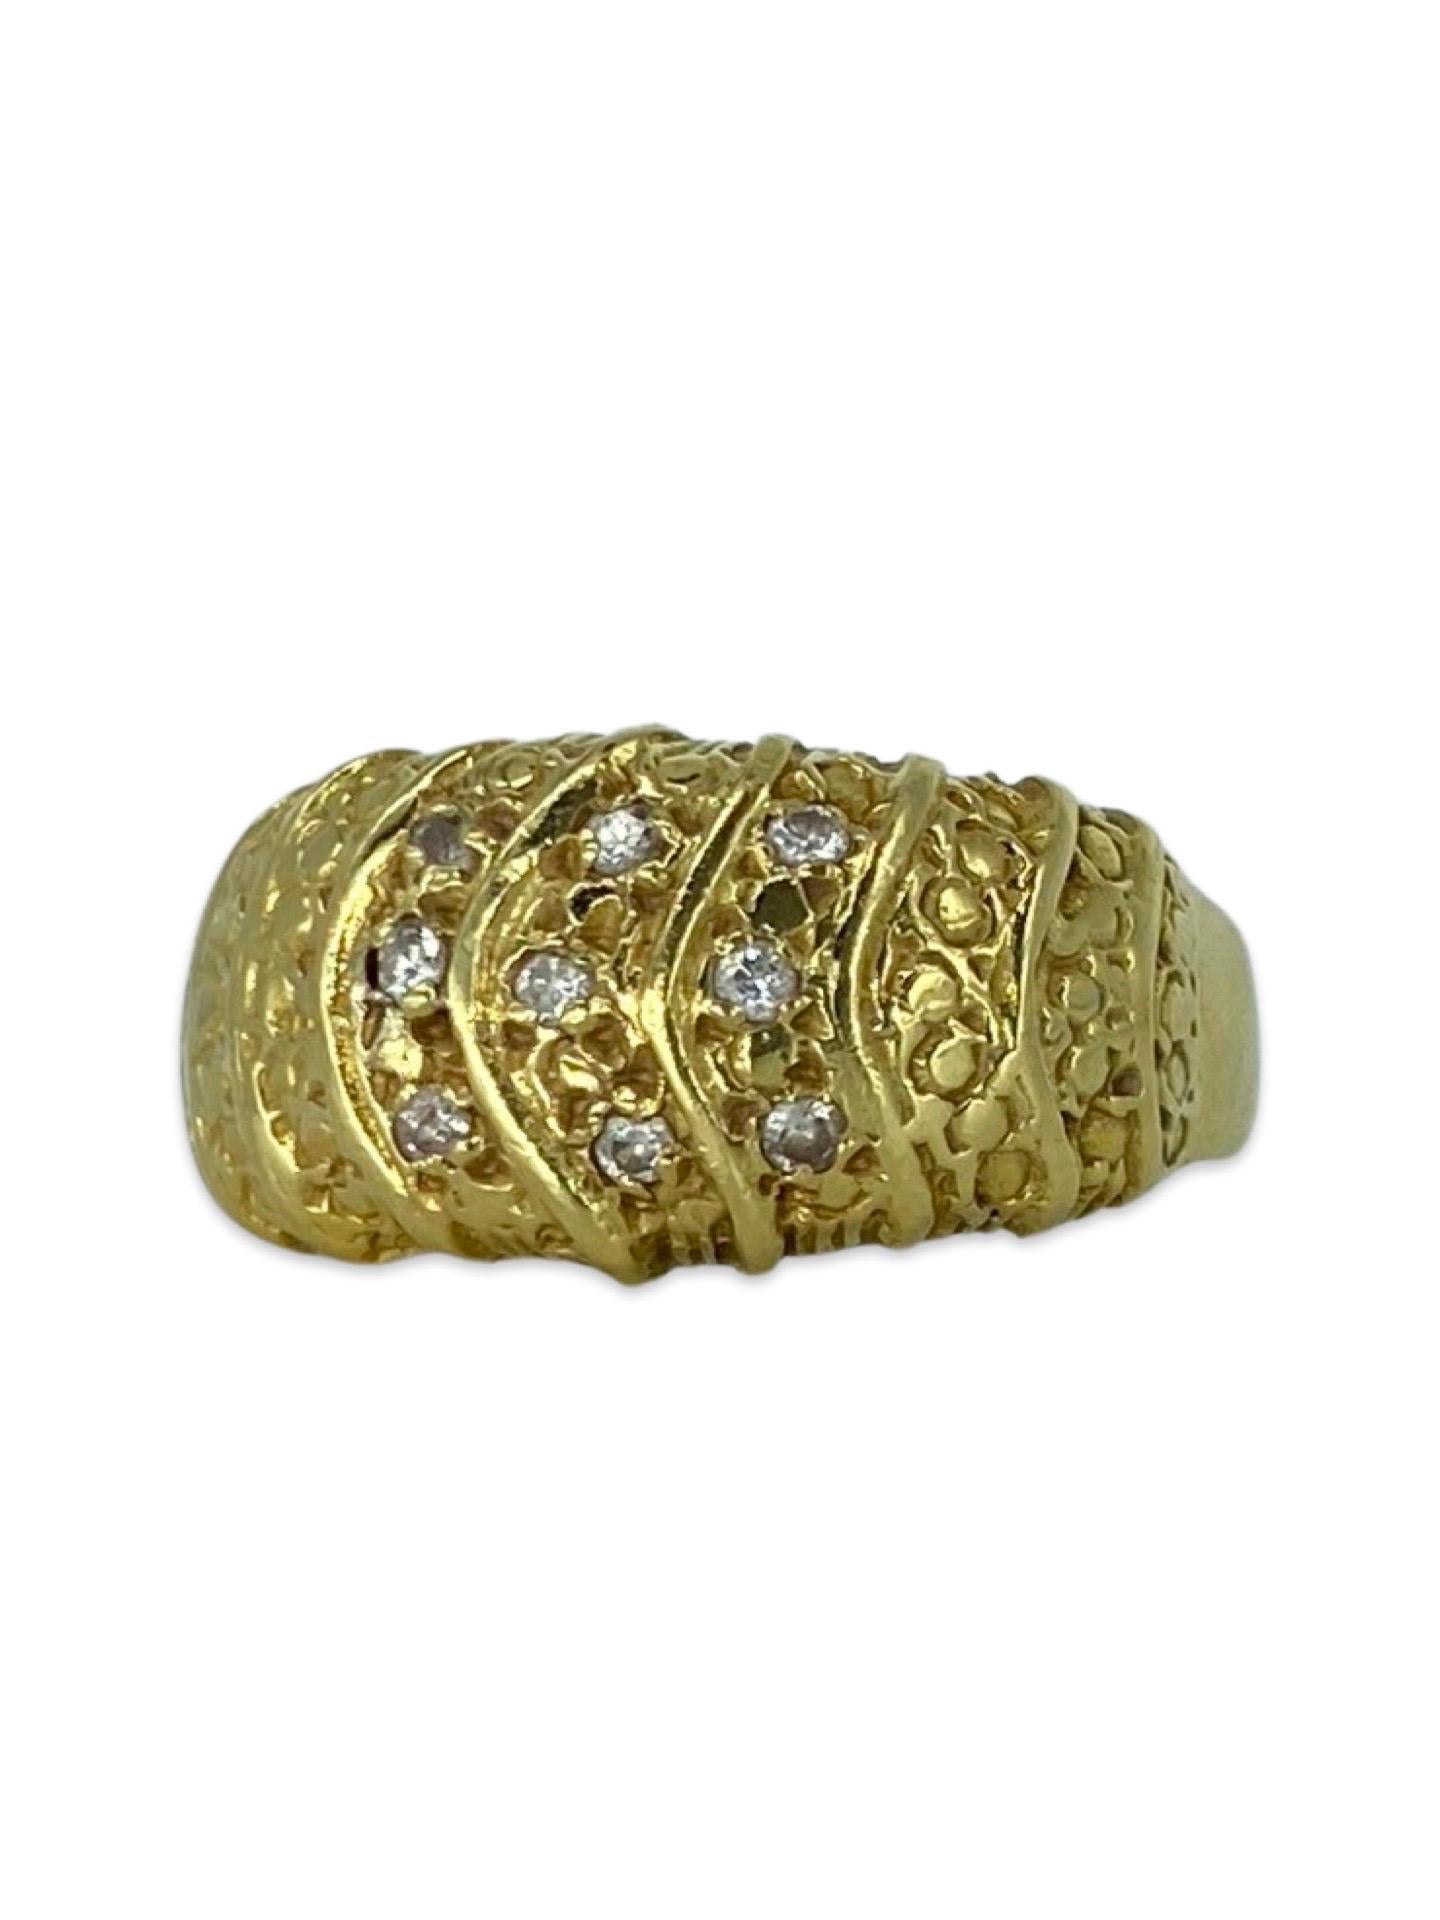 Vintage 0.10 Carat Diamonds Hammered Design Ring 18k Gold. The ring measures 10mm in height and features nine round diamonds for a total of 0.10tcw. The ring is a size 8 and weights 4.2g